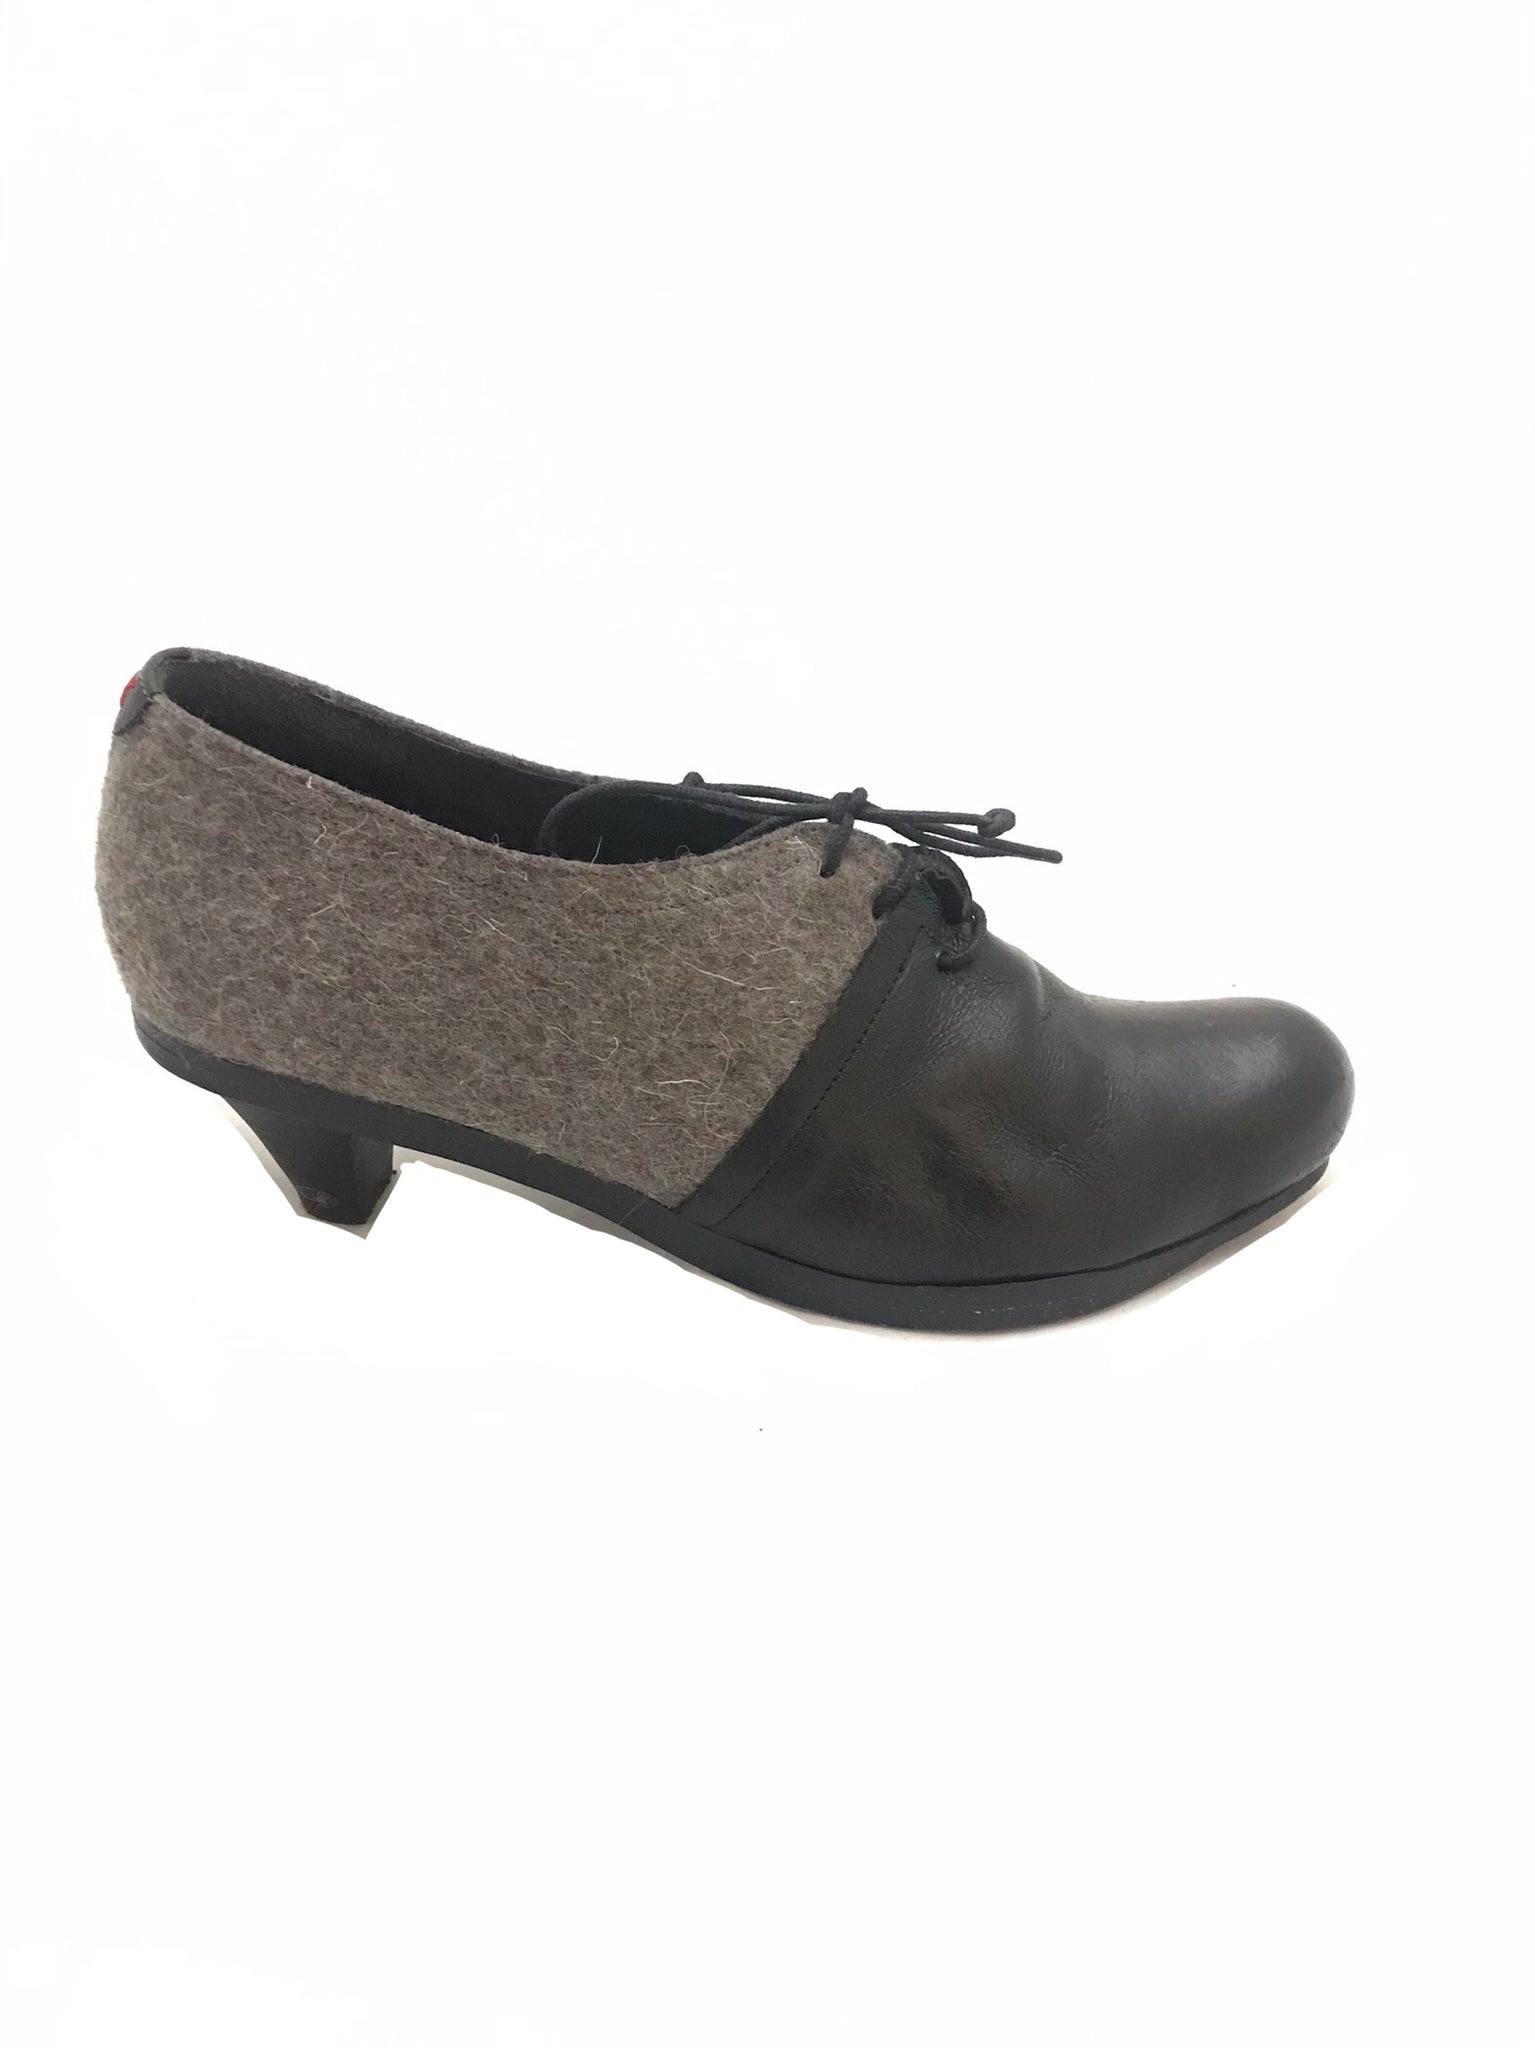 Isabella's Wardrobe Tracey Neuls Leather and Wool Heels.